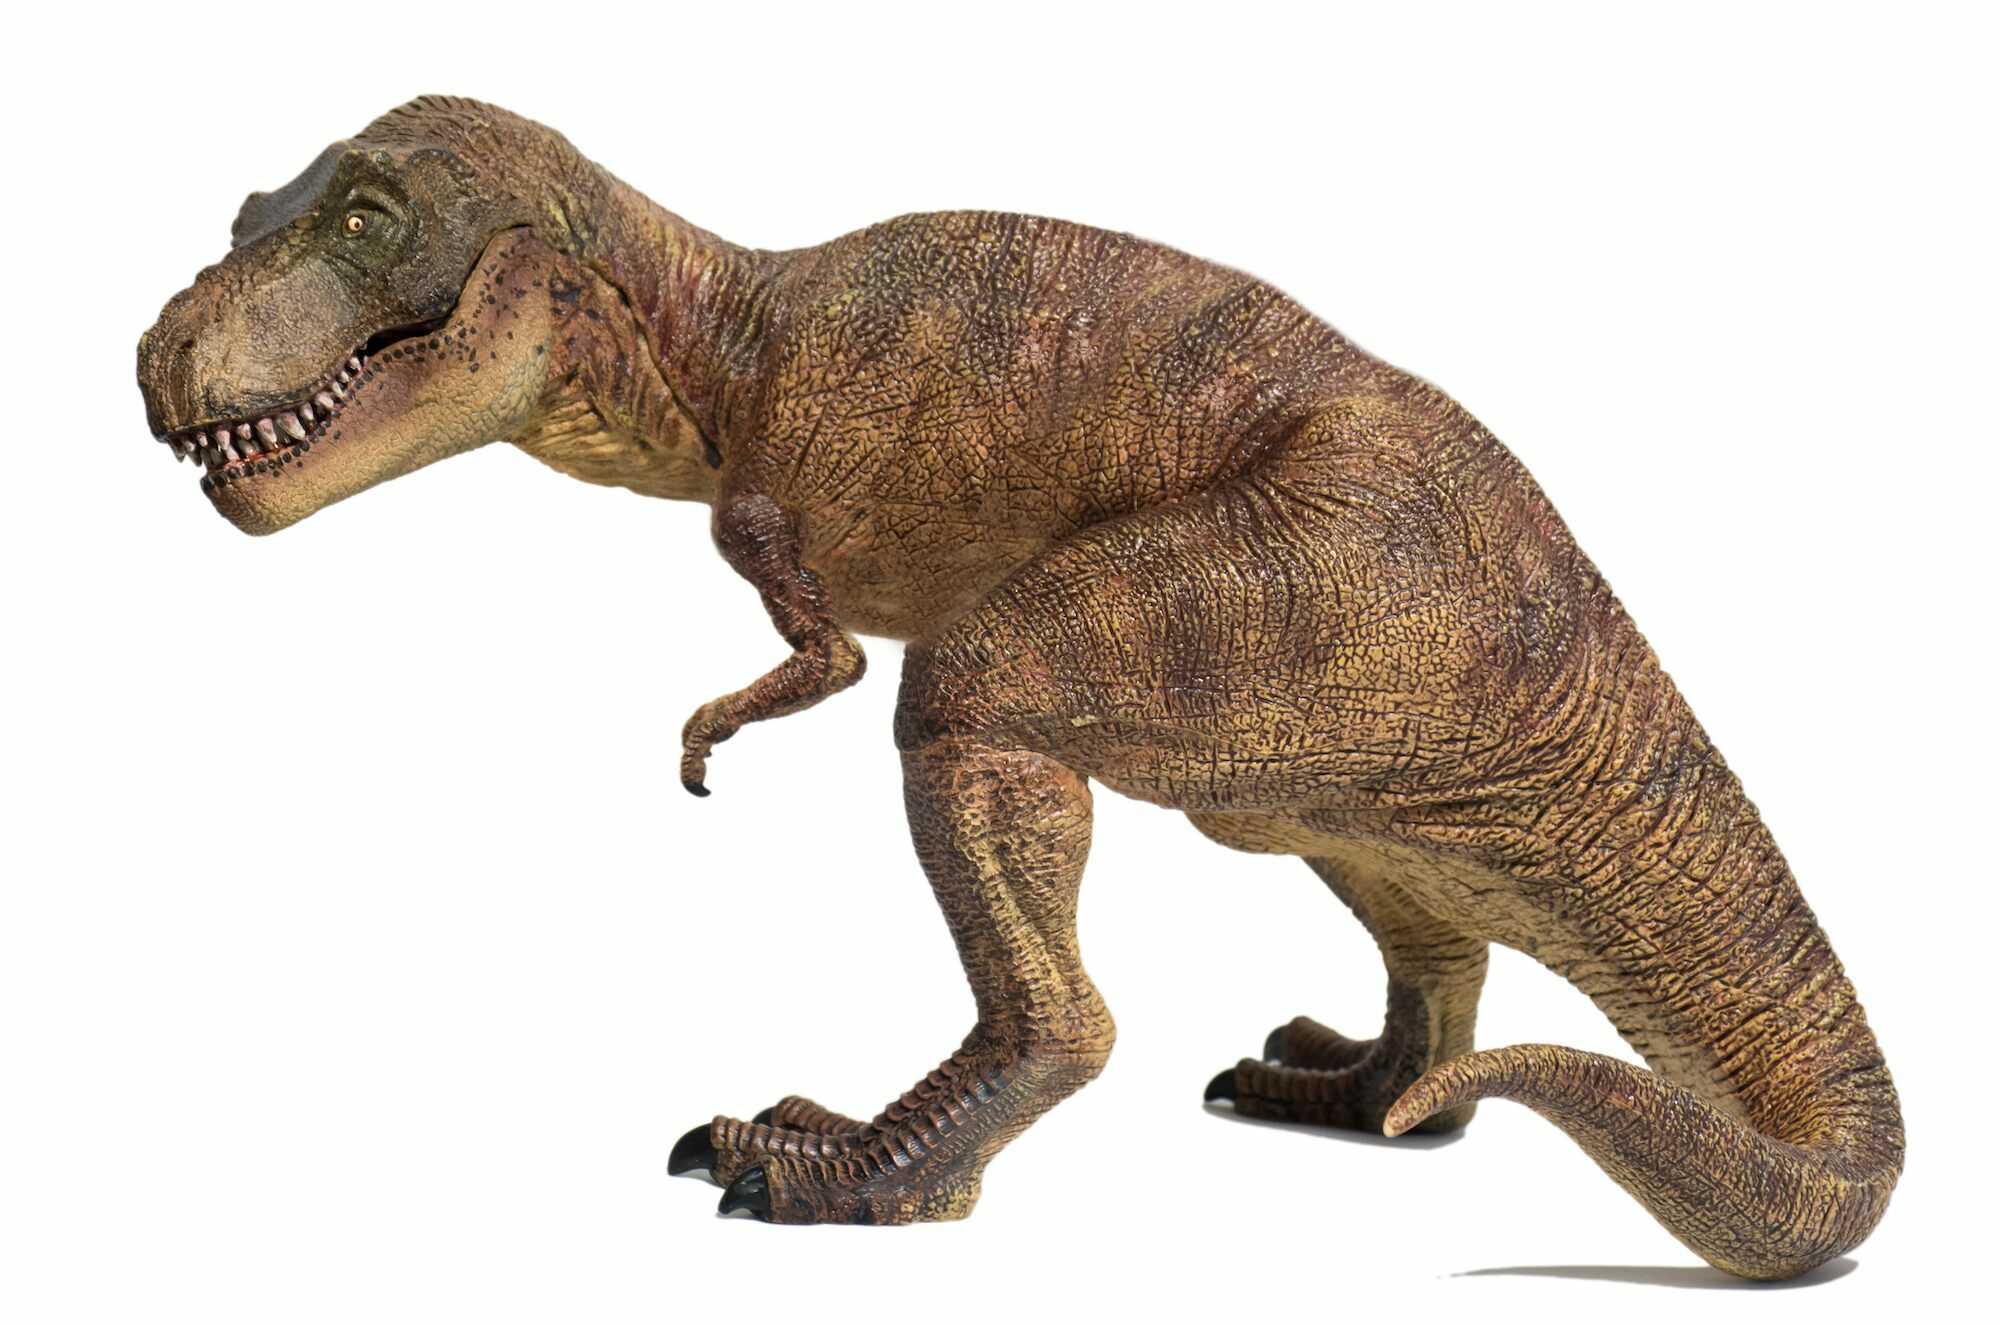 What do you know about T. rex?